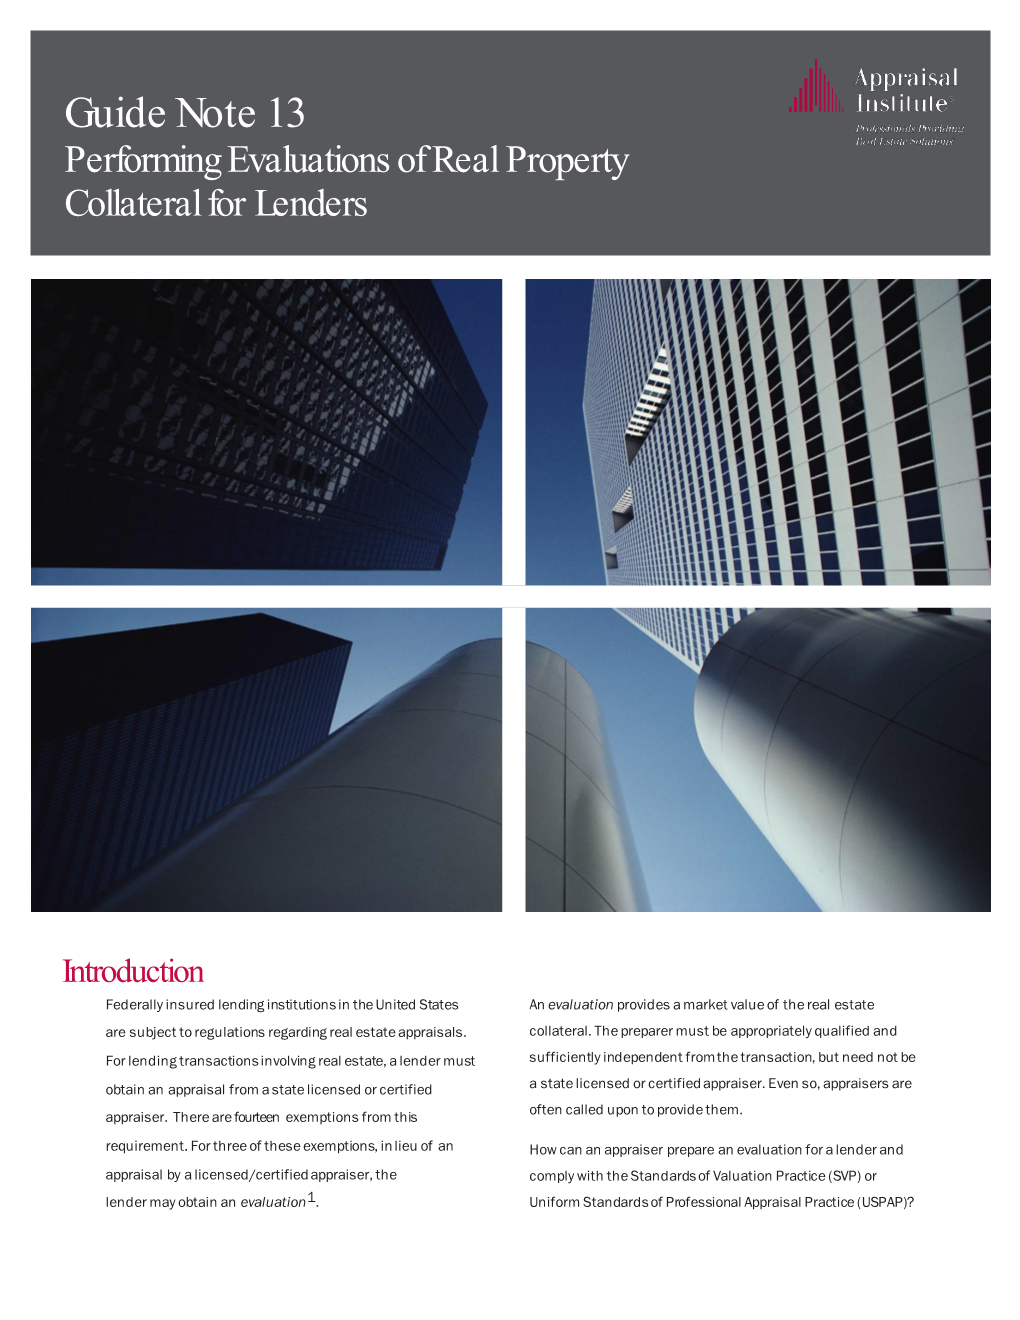 Guide Note 13 Performing Evaluations of Real Property Collateral for Lenders